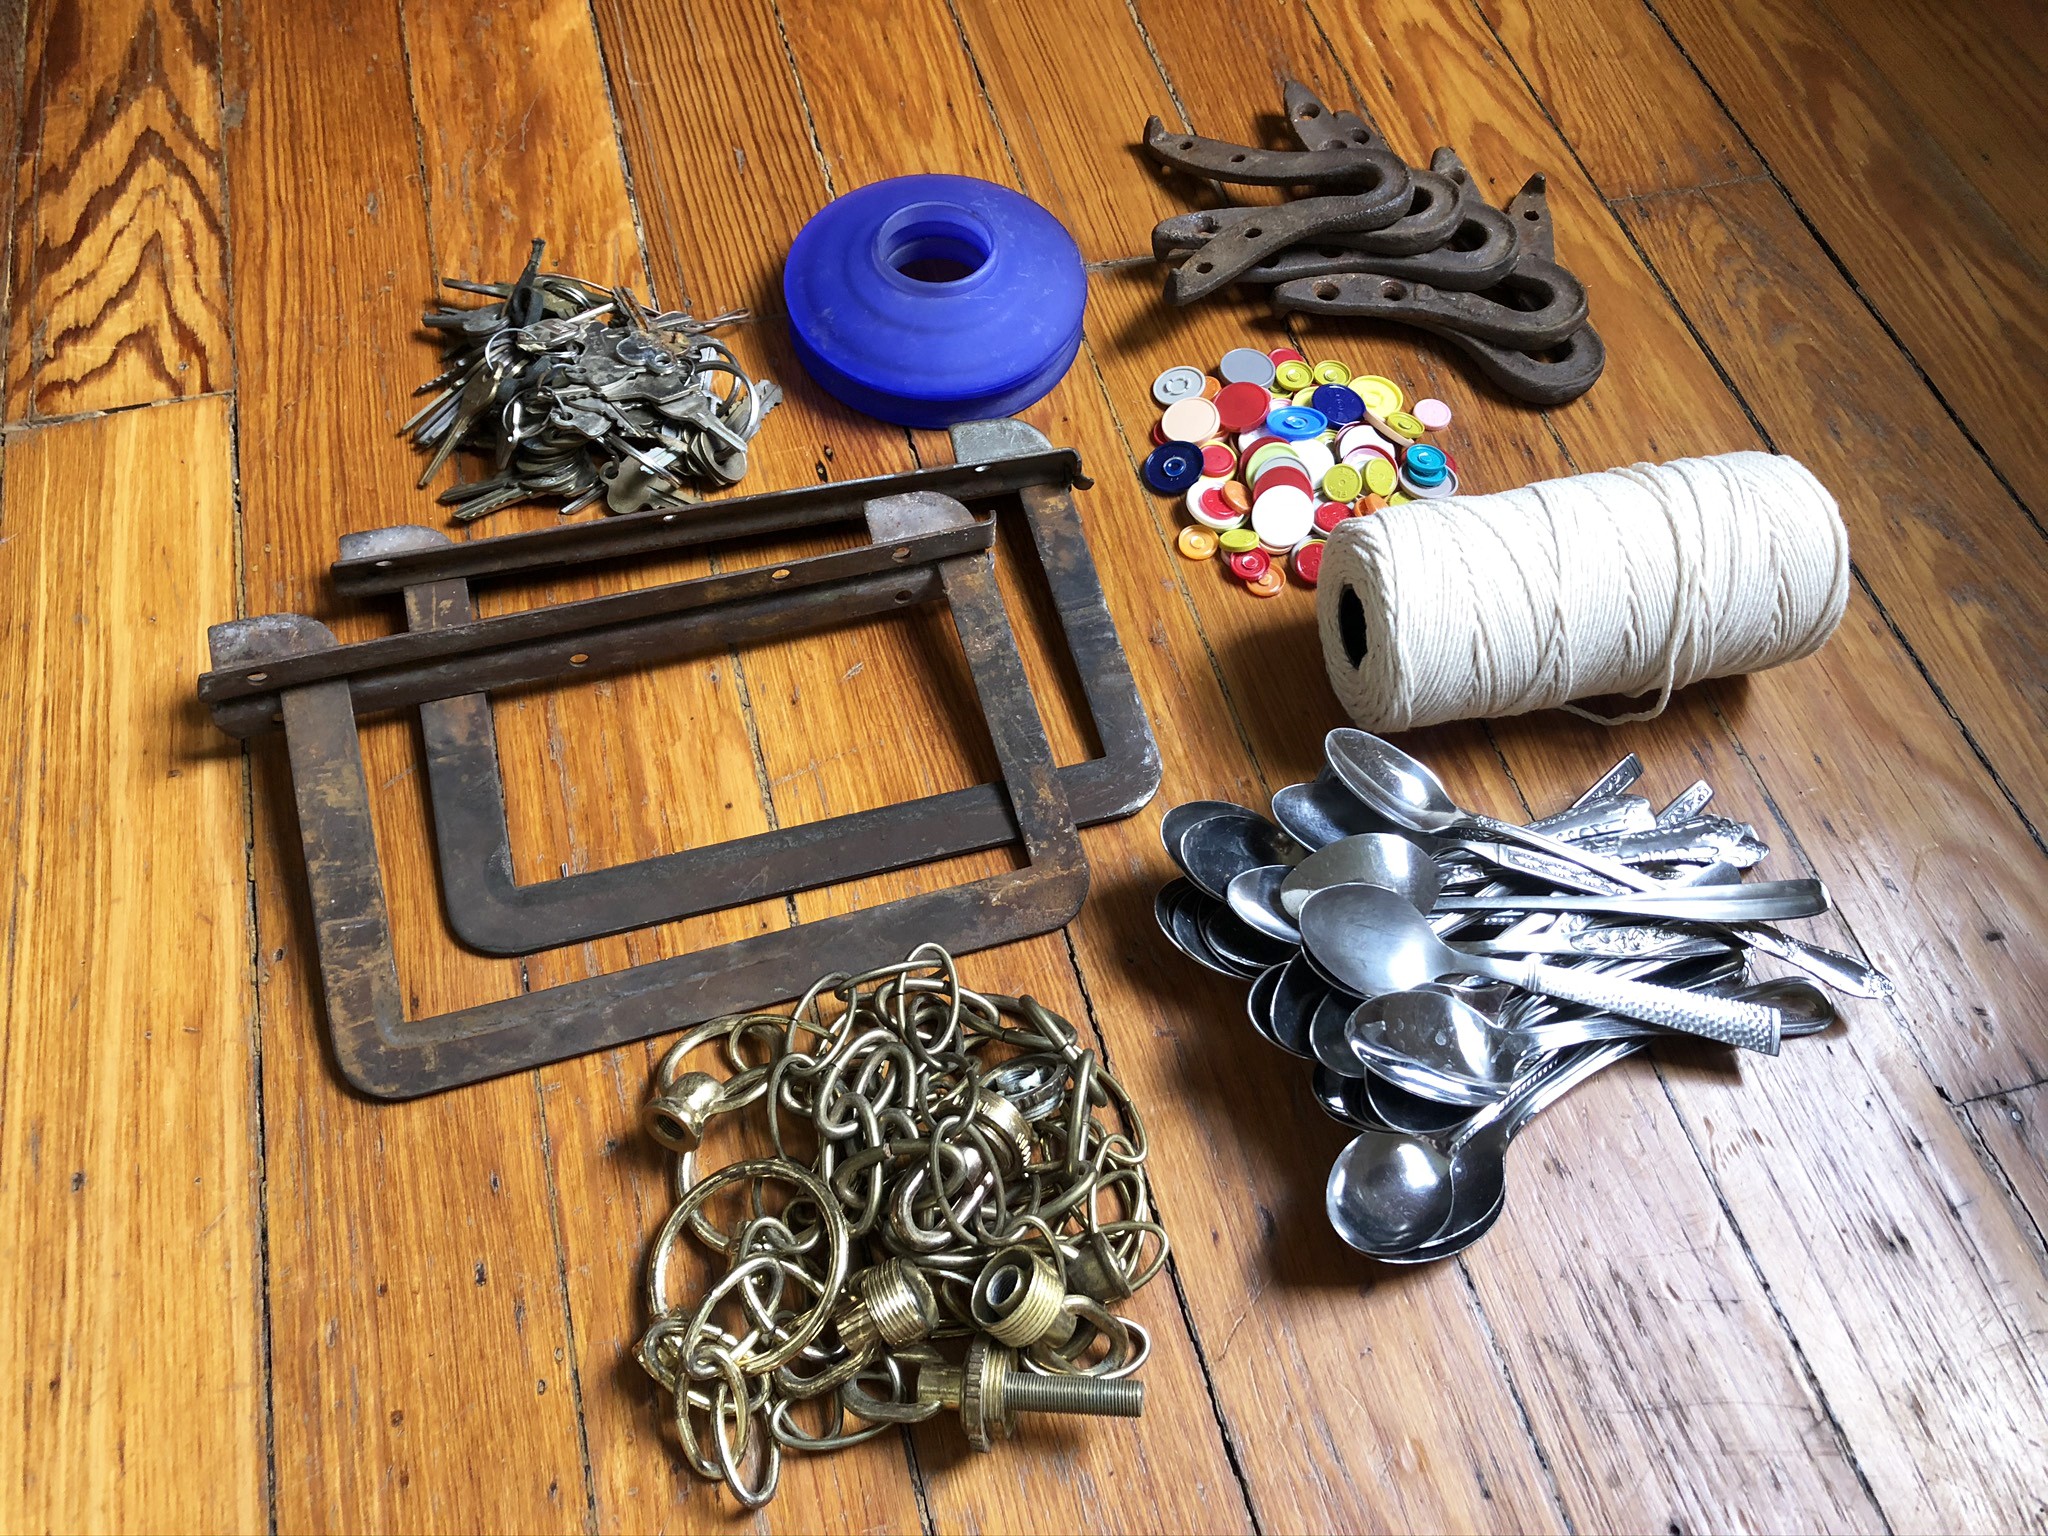 Supplies for the activity laid out on a wood table, including spoons, string, and keys.